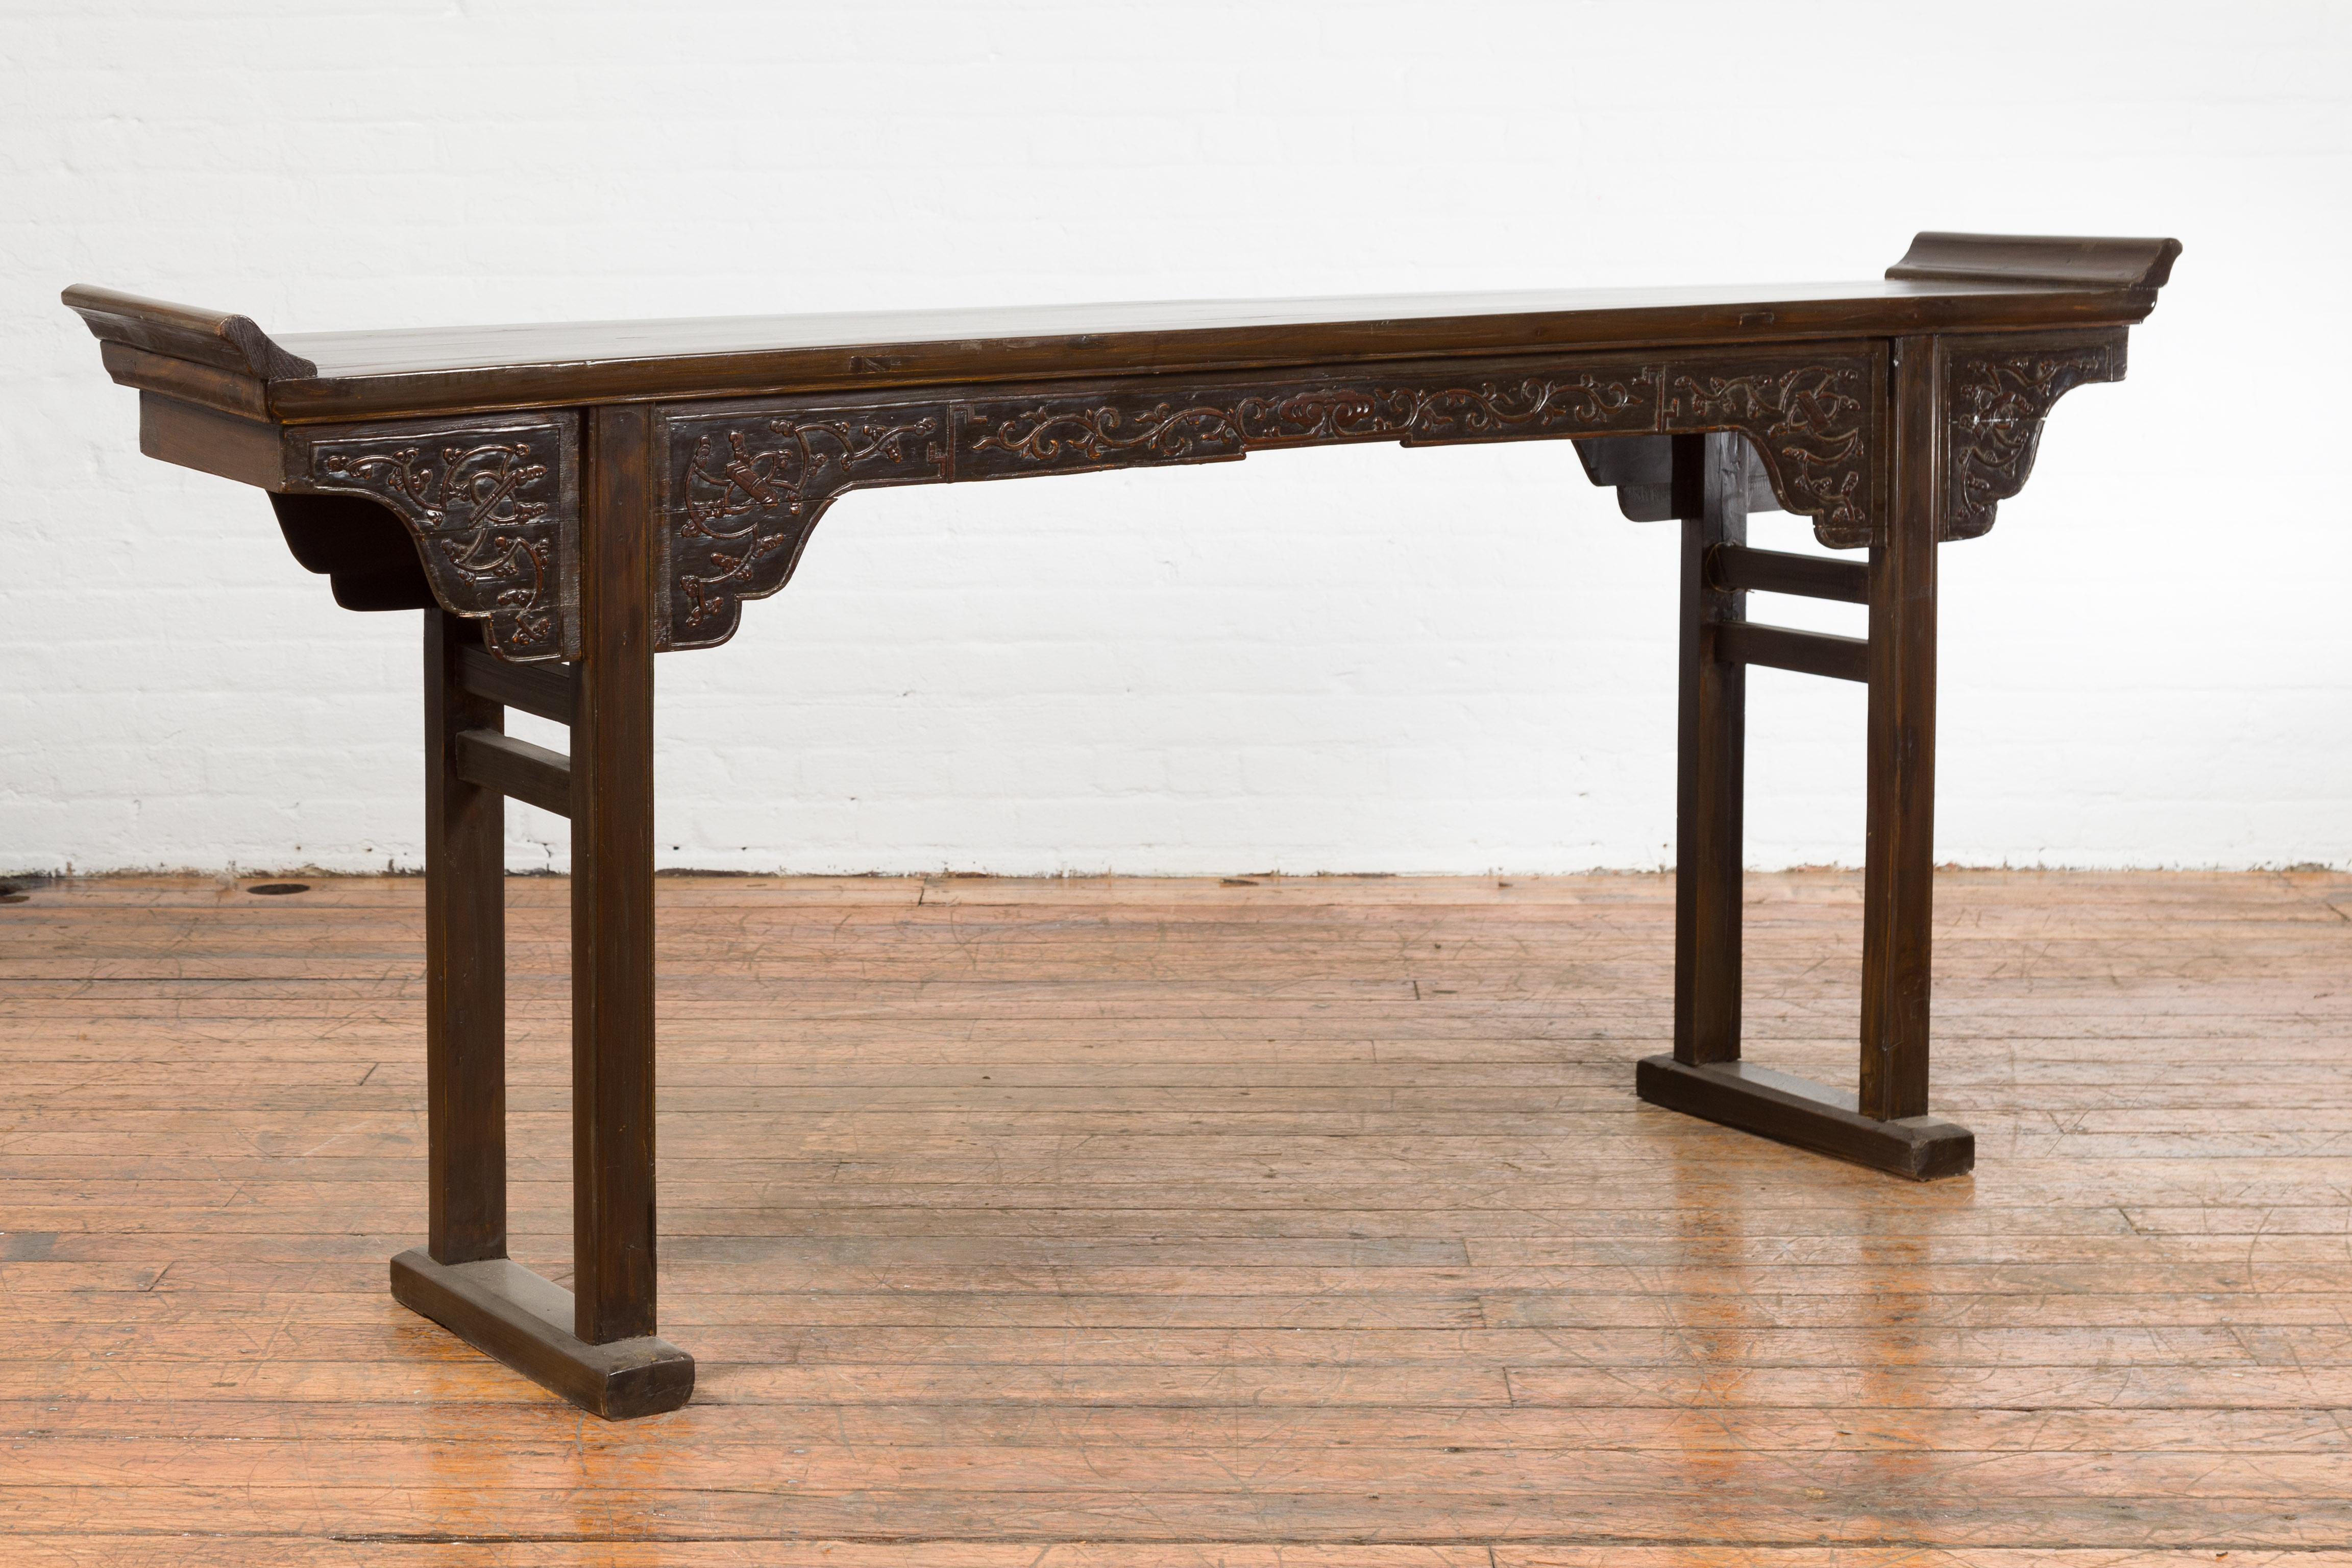 A Chinese Qing Dynasty period altar console table from the 19th century, with foliage-carved apron and everted flanges. Created in China during the Qing Dynasty period, this wooden altar console table features a long and narrow rectangular top